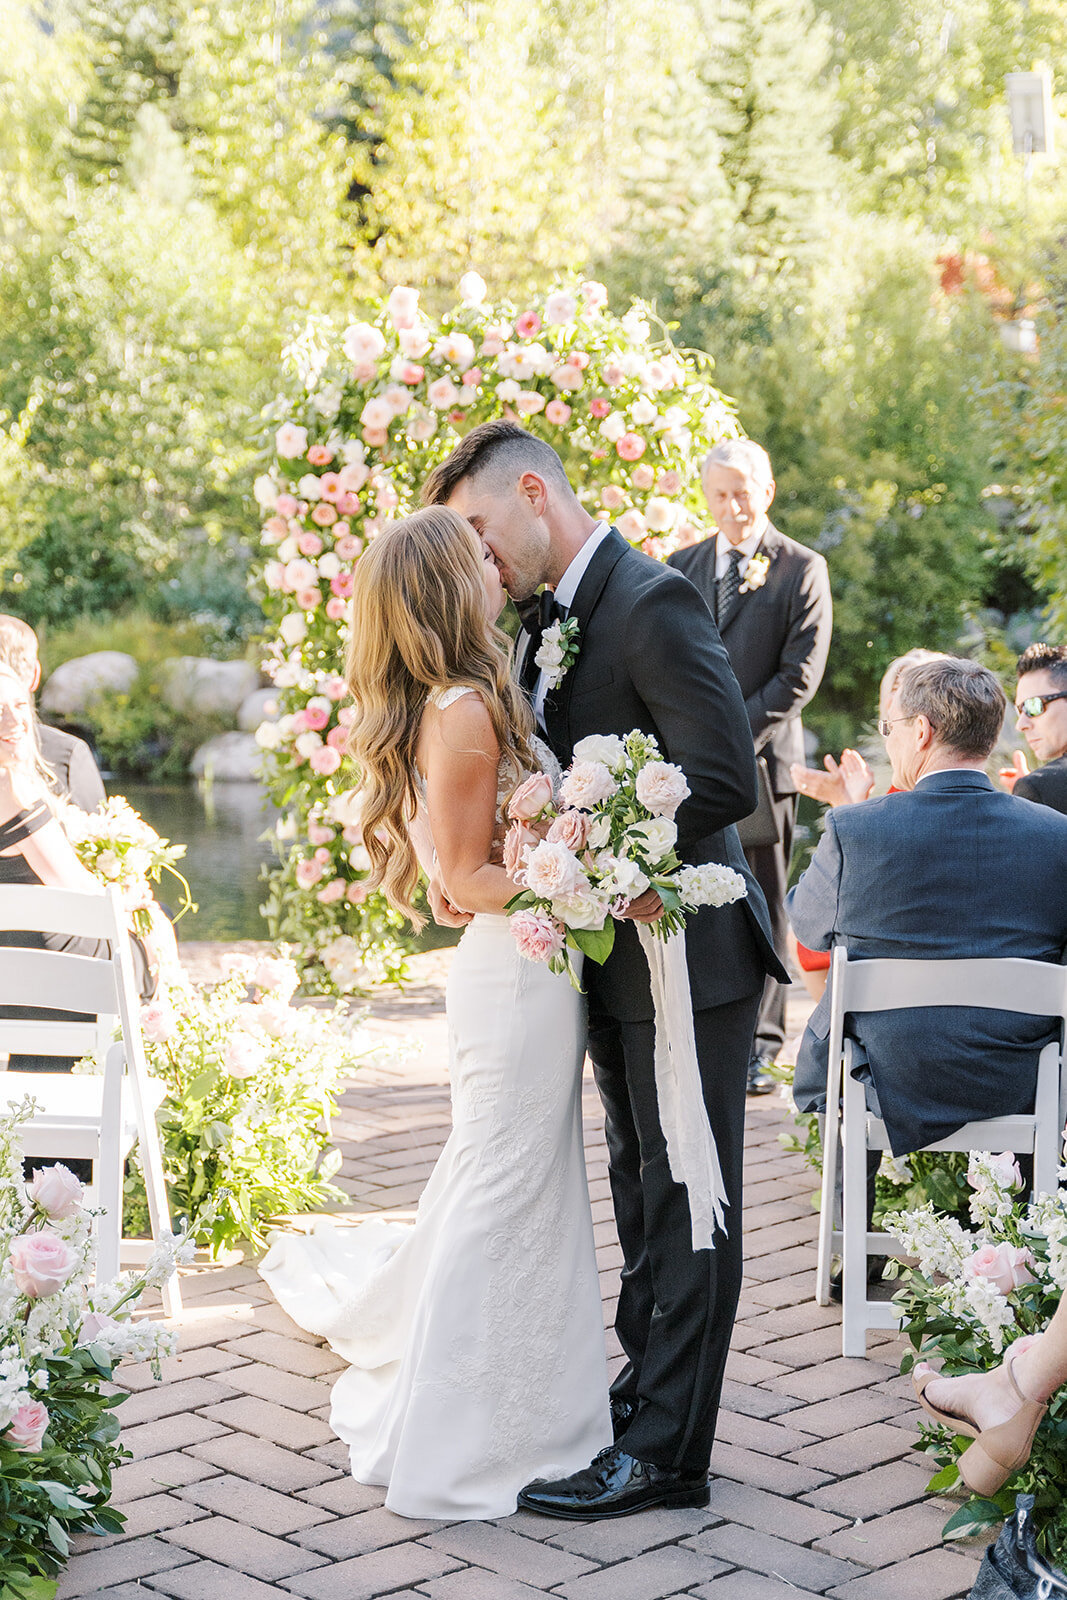 Christina and Stuart Hotel Jerome Wedding in Aspen Colorado by Kelby Maria Photography-04427